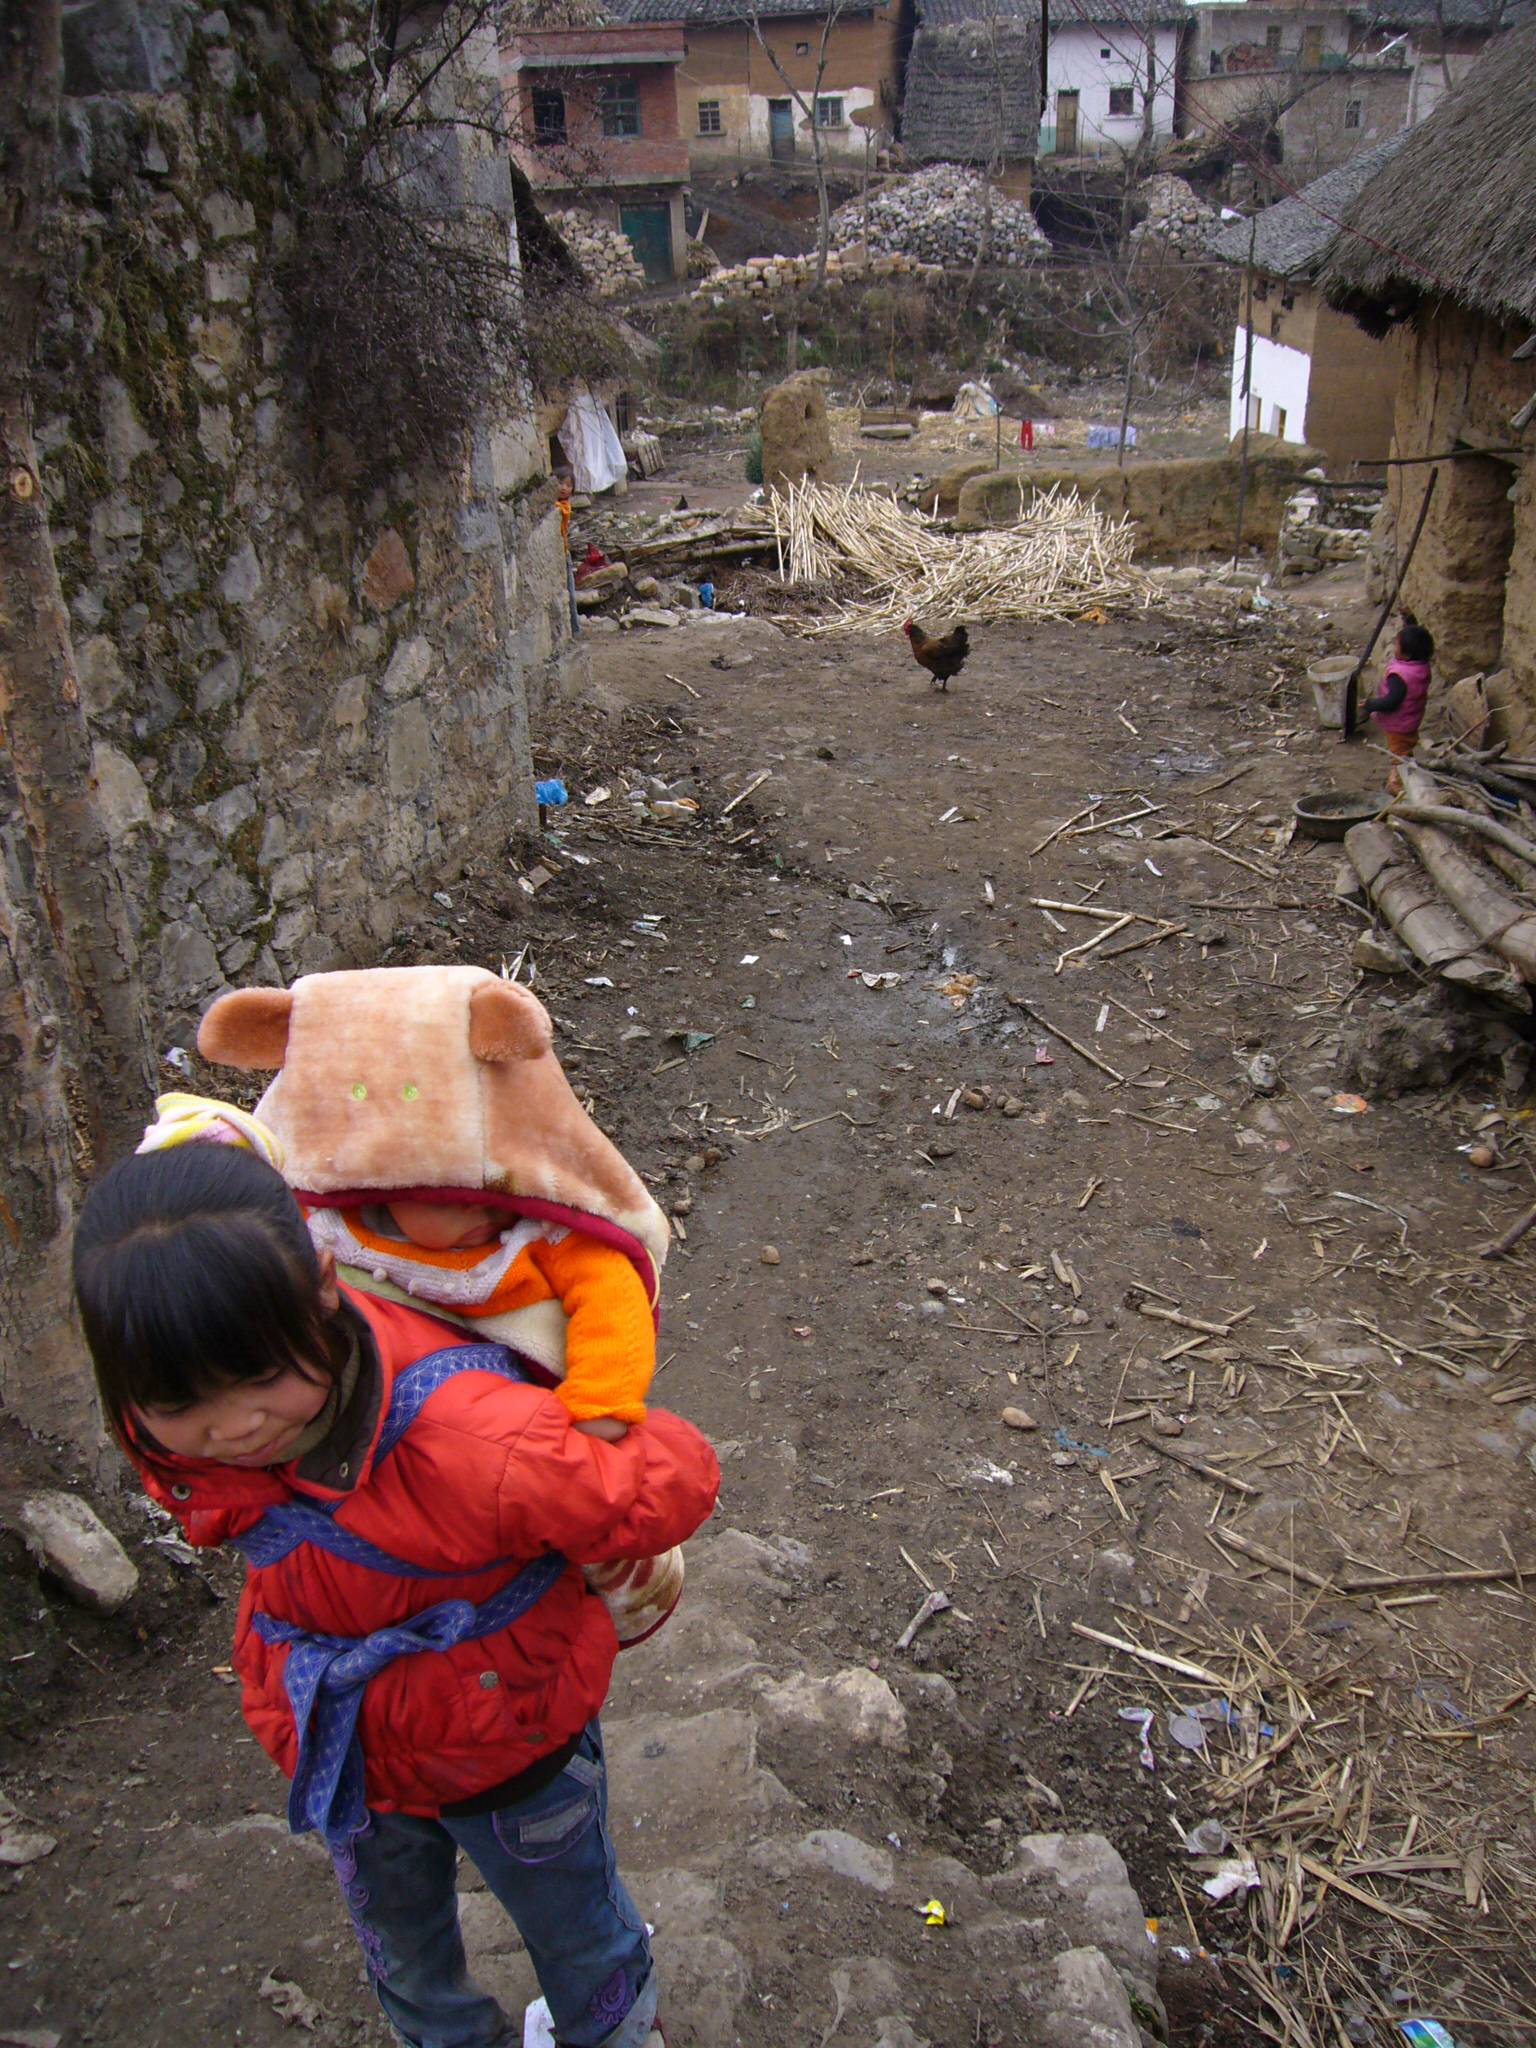 Young rural Chinese daughters carry the burden of their infant siblings while their parents work.